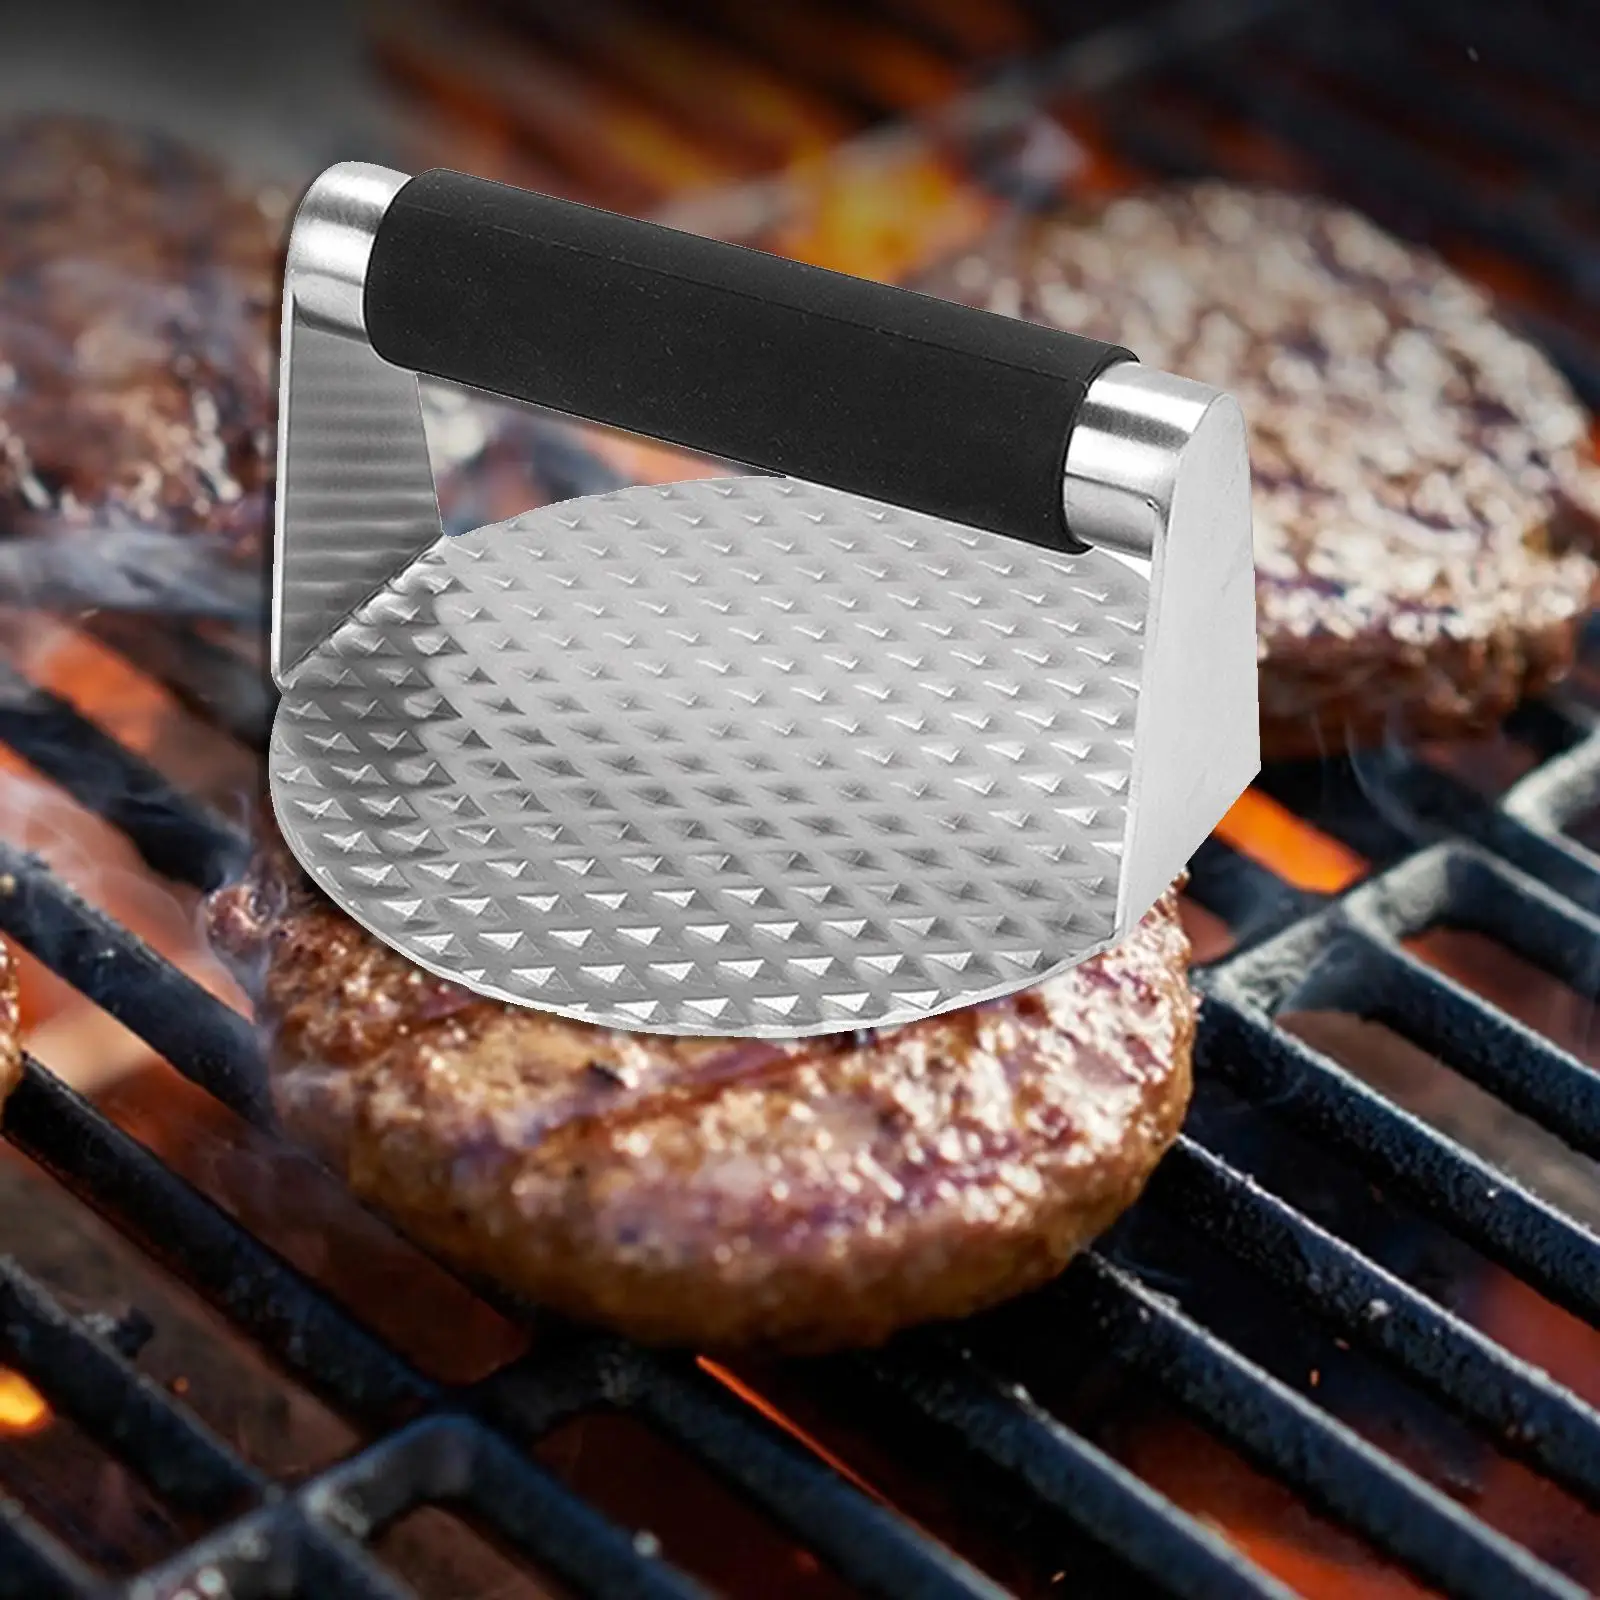 304 Stainless Steel Burger Press Nonstick Kitchen Accessories Hamburger Press Meat Smasher for Grill Meat Beef Steaks Barbecue